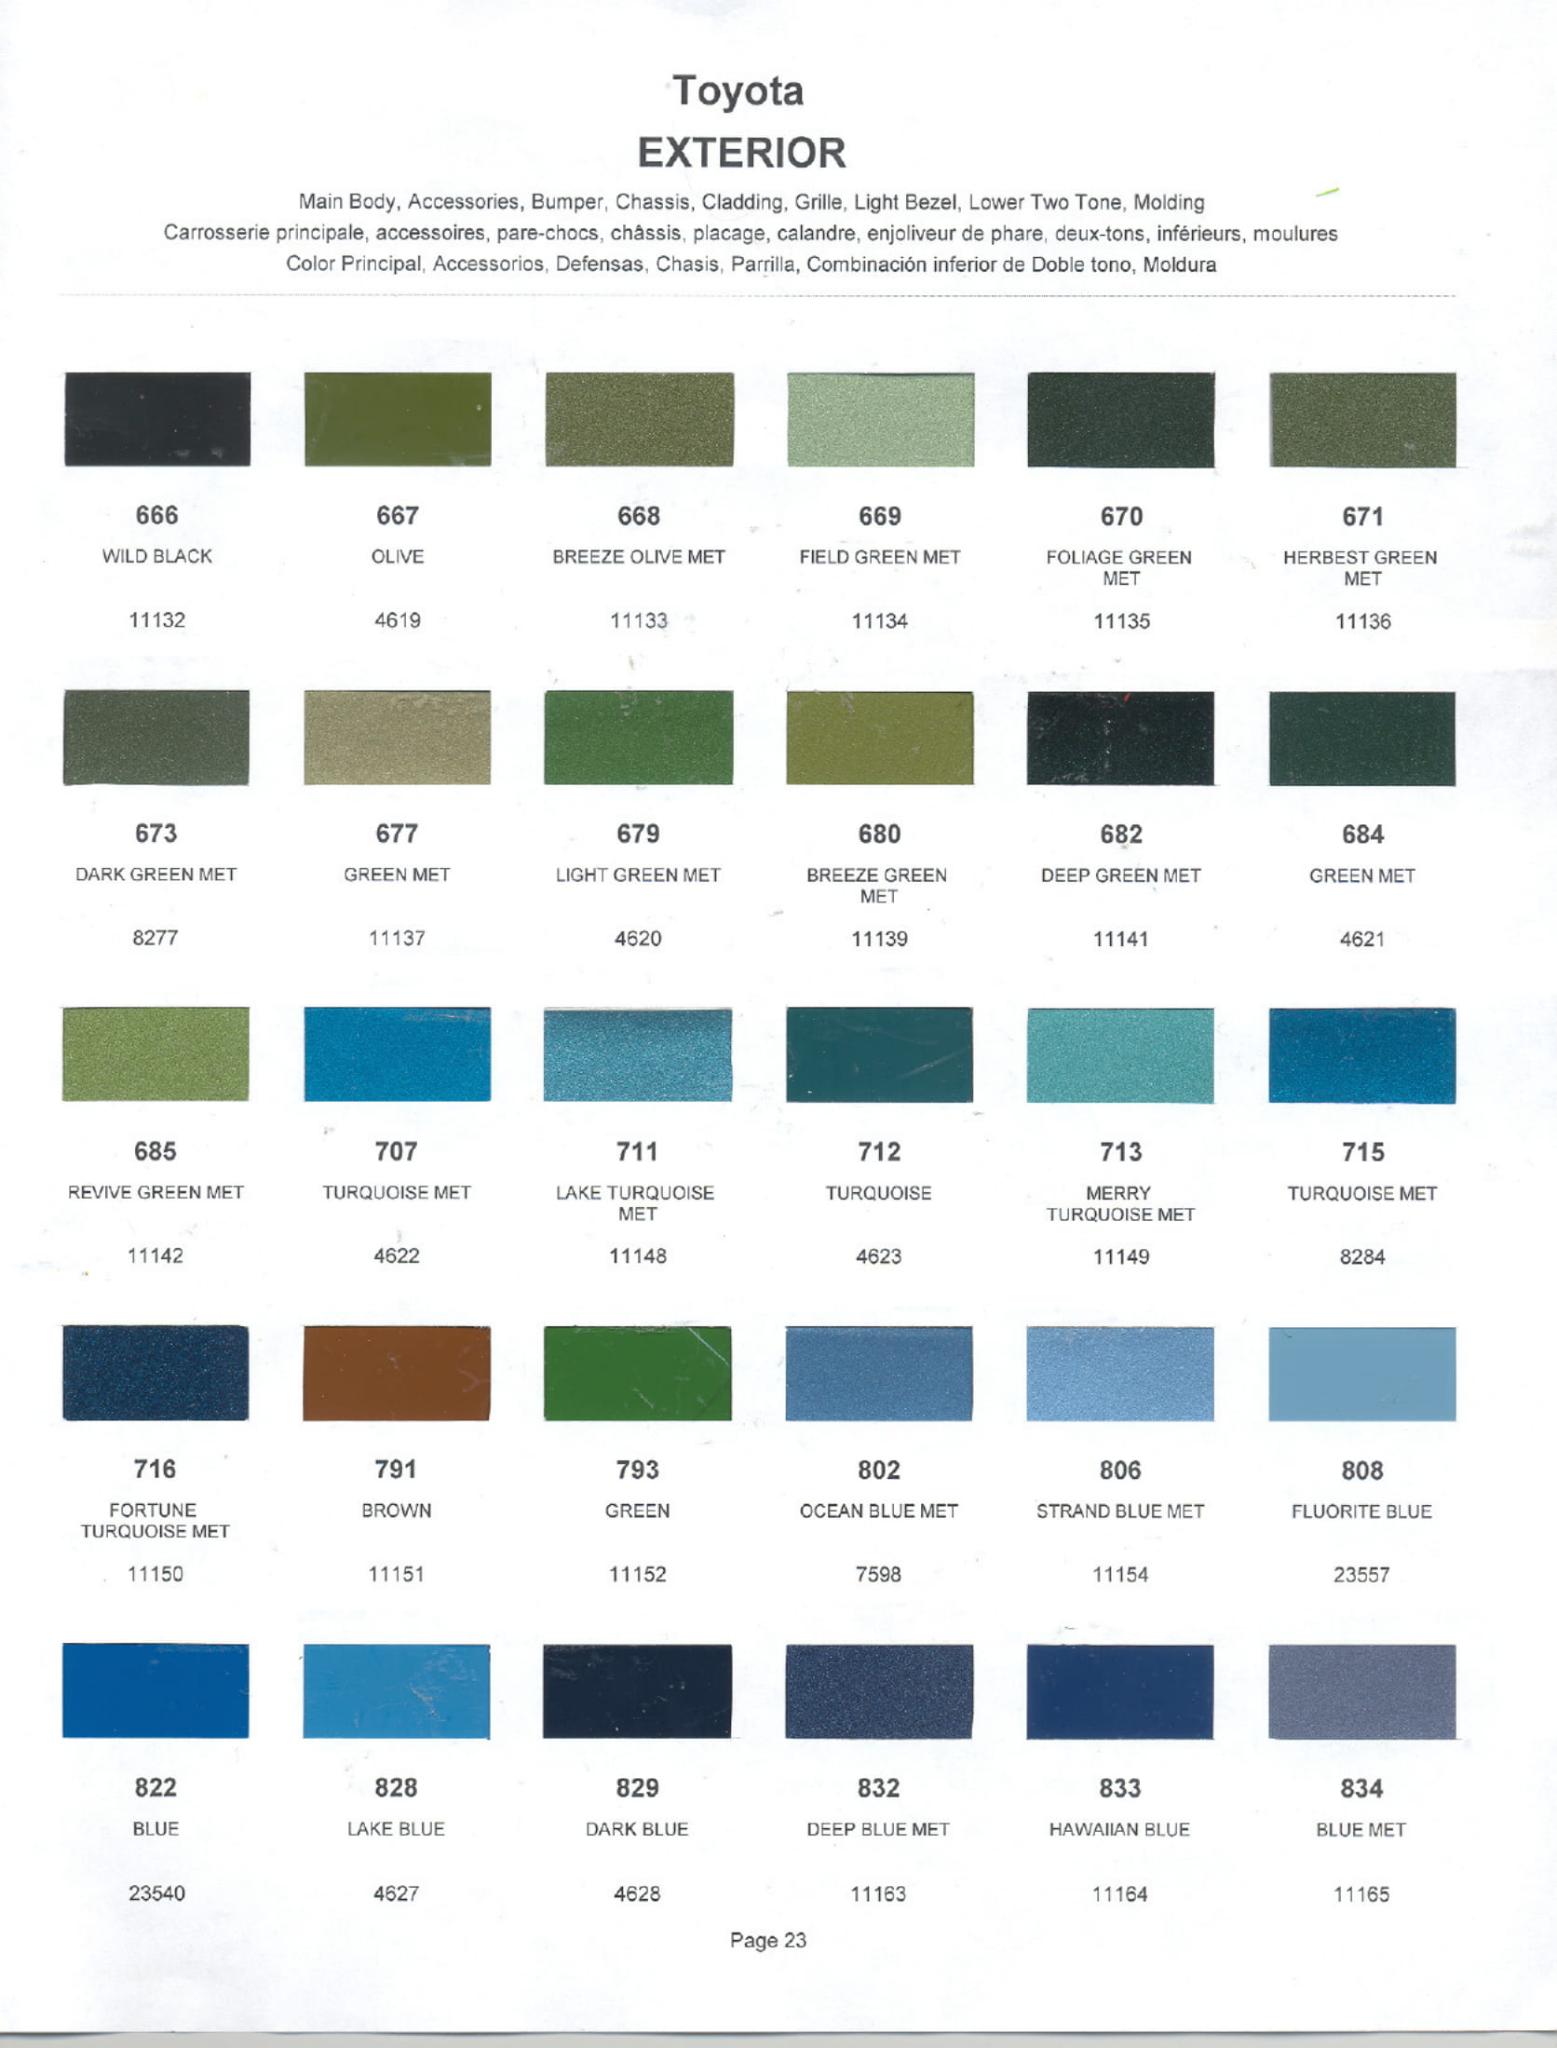 Toyota Paint Codes, Toyota Color Chart